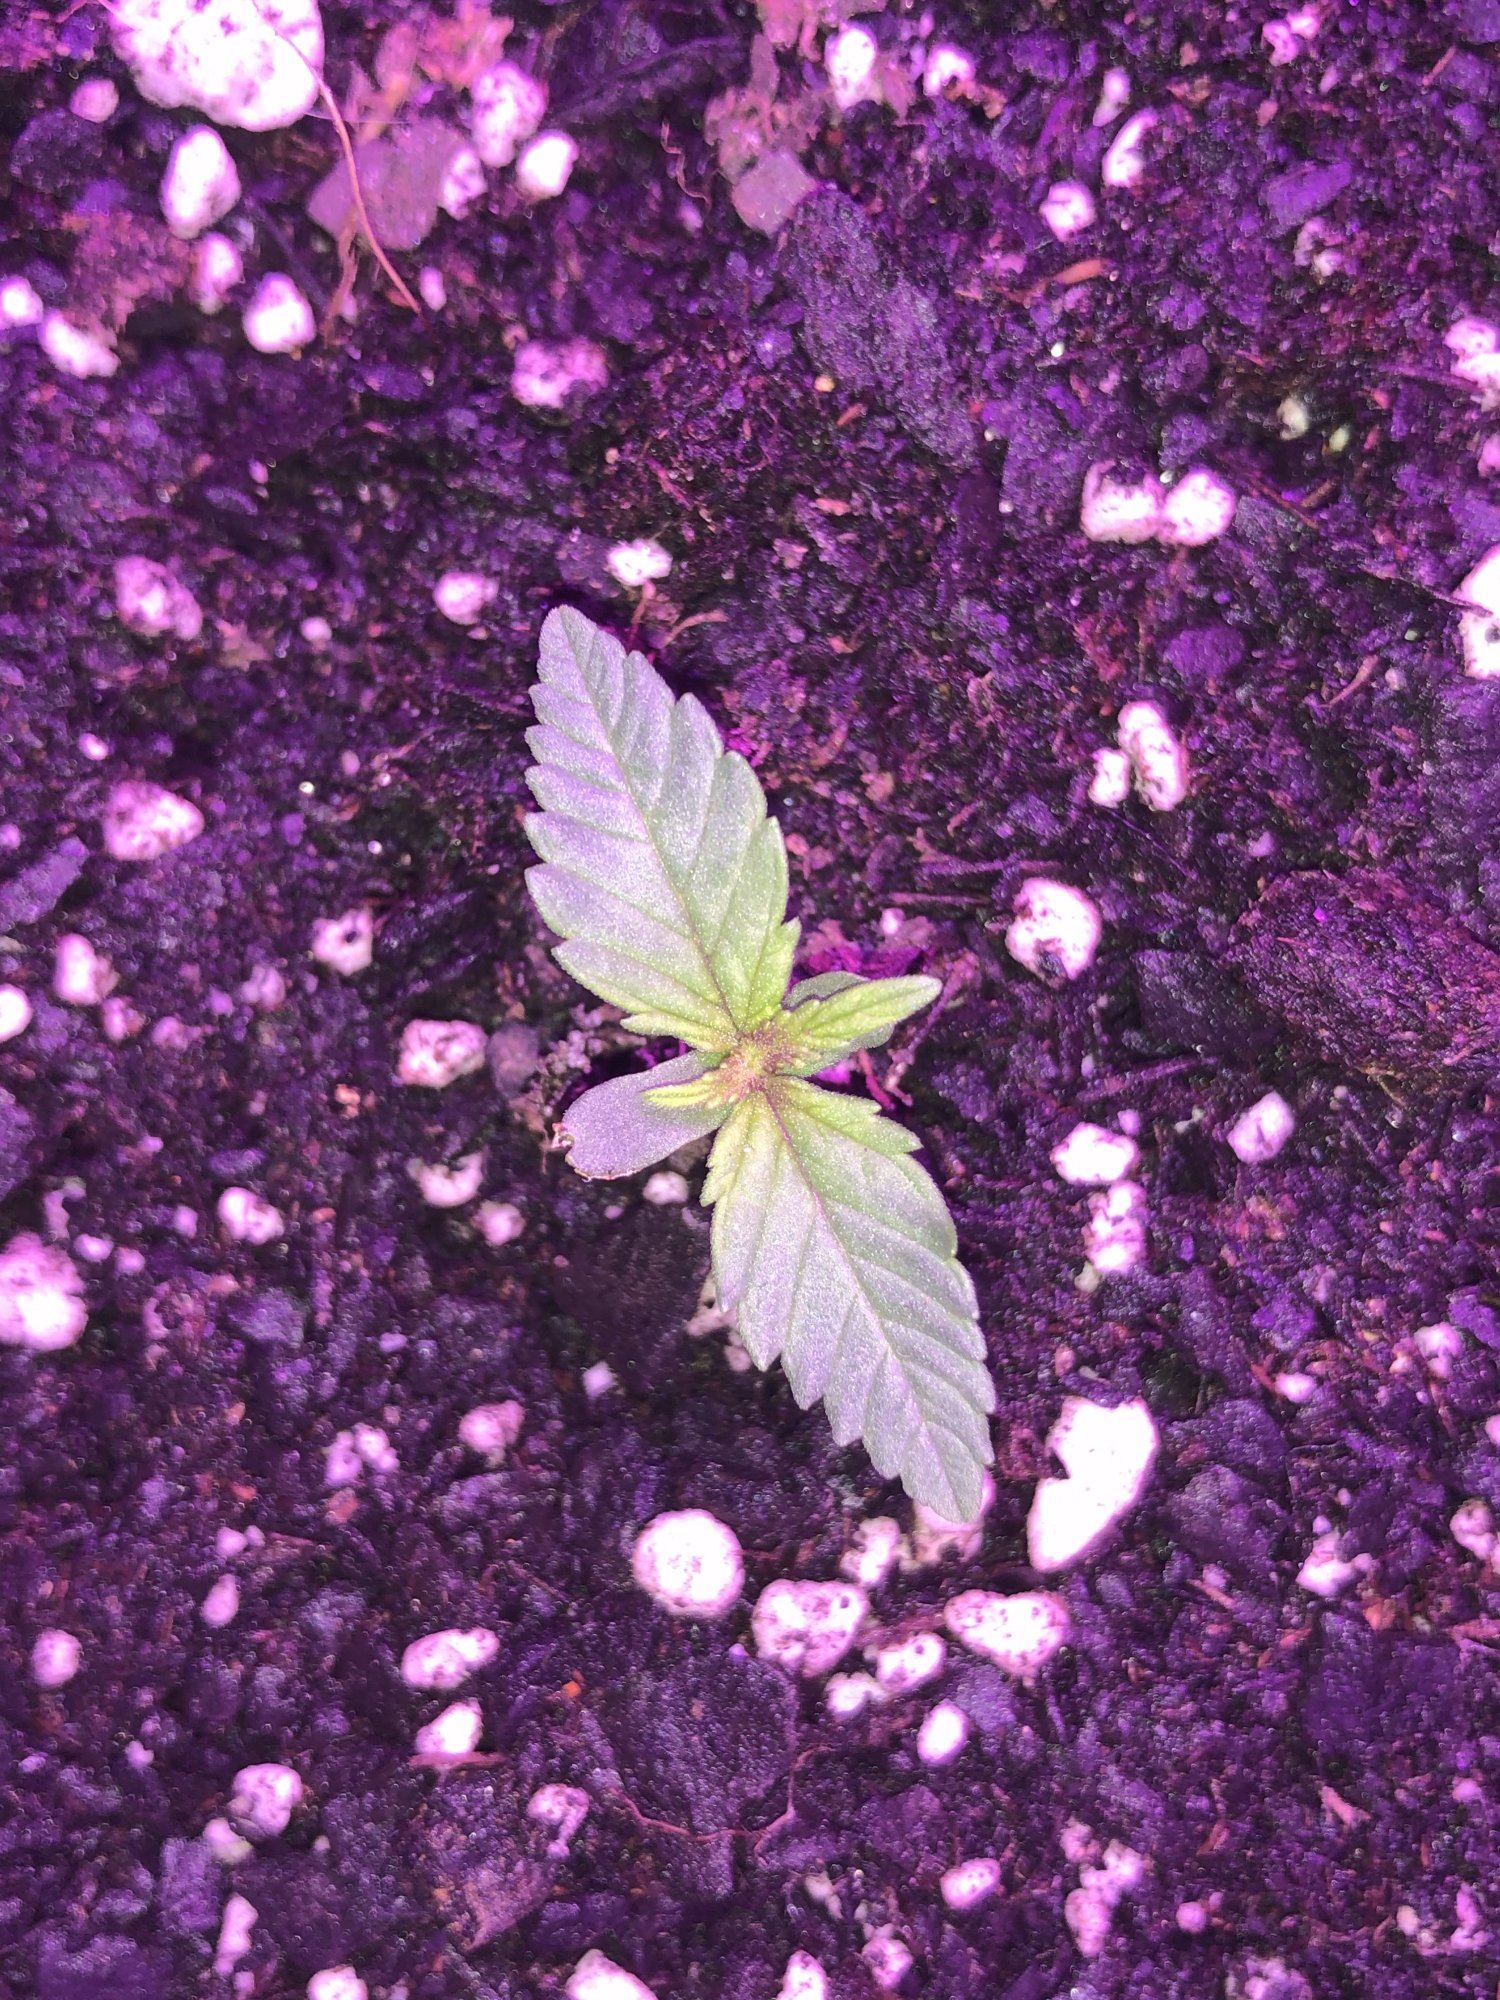 Hey first timer  reddish growth coming from center of seedling no idea what it is 2